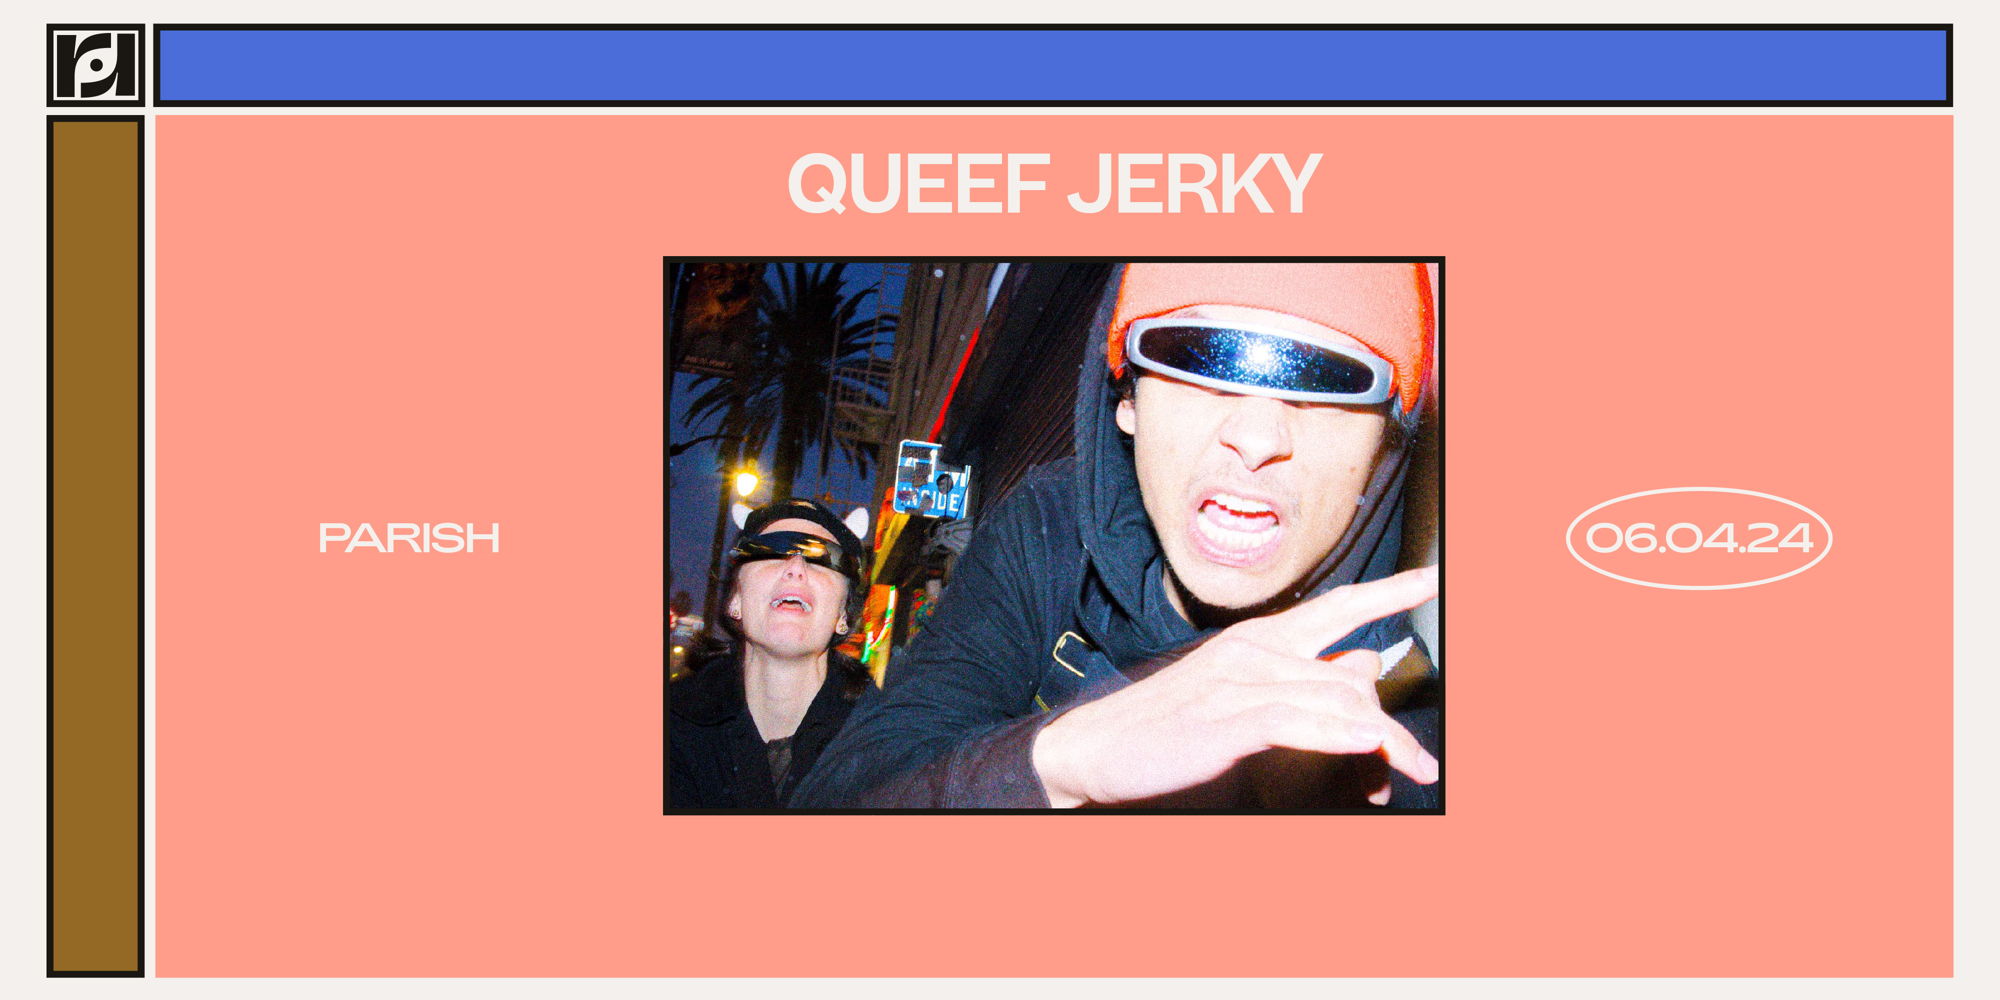 Resound Presents: Queef Jerky at Parish on 6/4 promotional image